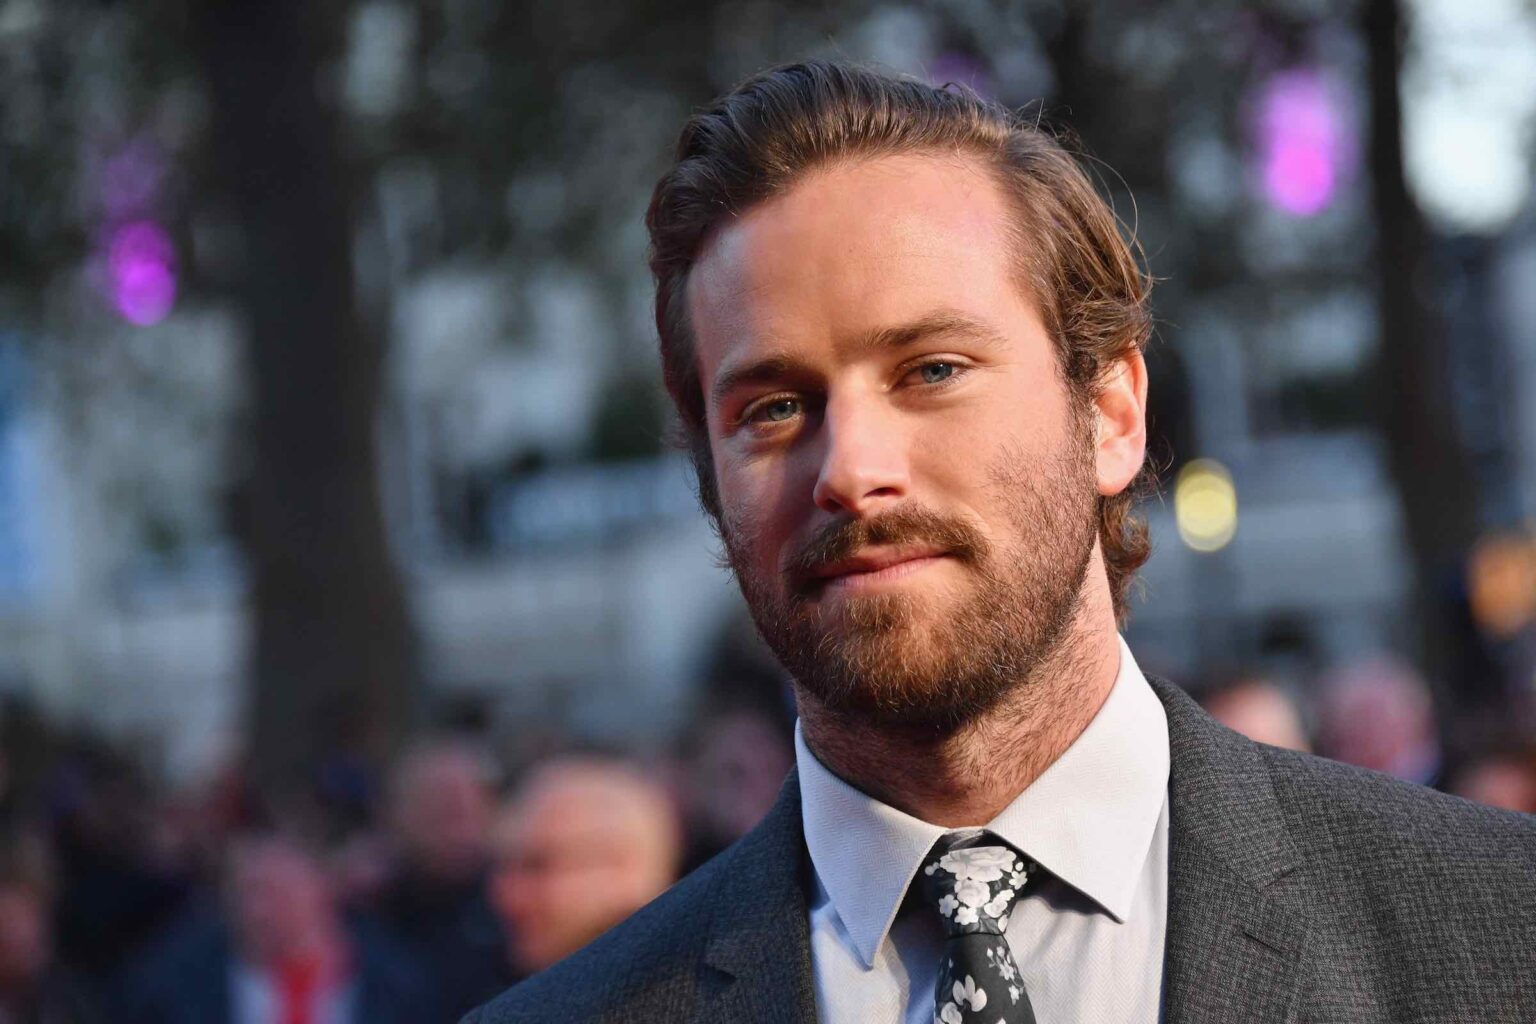 Armie Hammer moved out of the house he shared with his ex-wife – in the middle of the night. Check the reason behind the fallen star's decision.